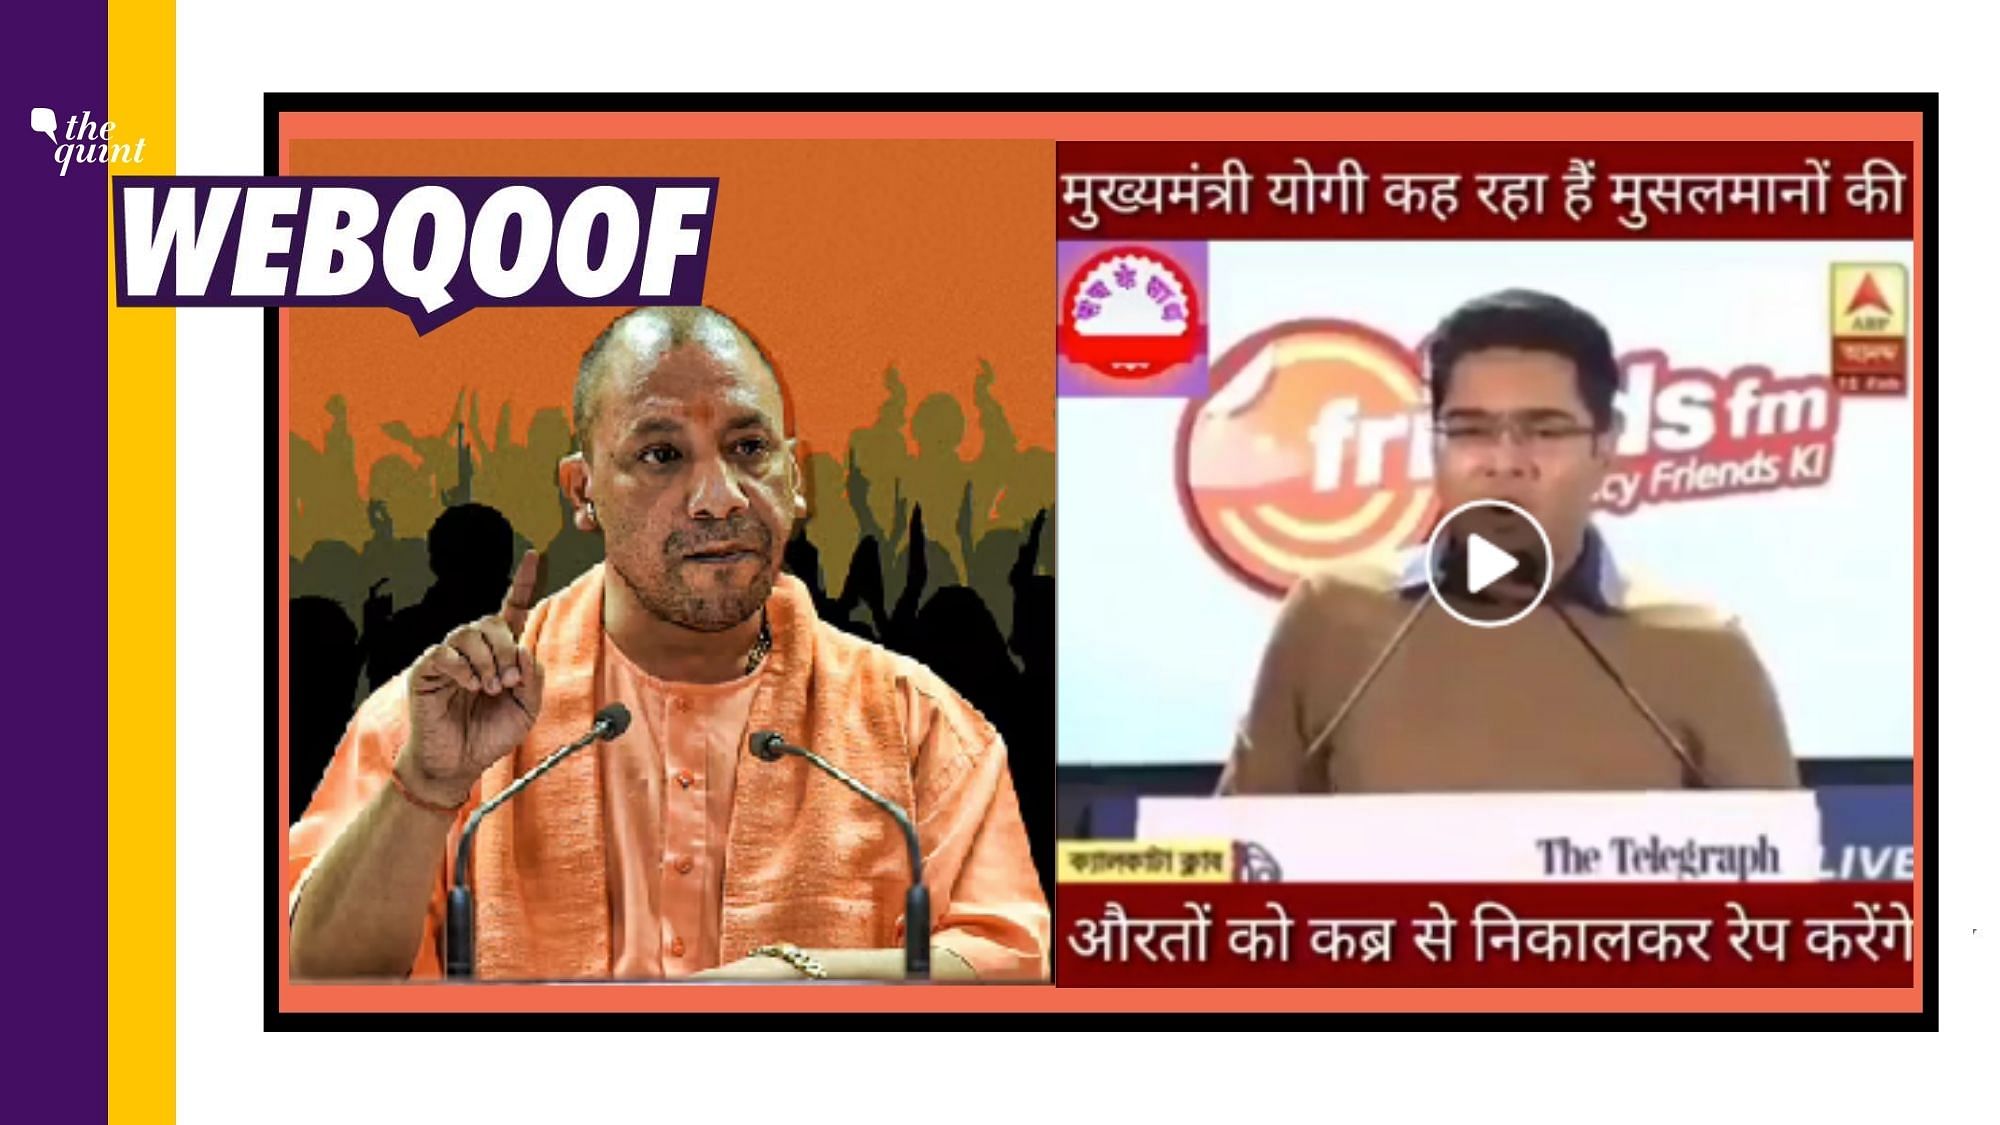 Abhishek Banerjee falsely attributed a statement to UP CM Yogi Adityanath, when in reality, the statement was made by a leader of Hindu Yuva Vahini.